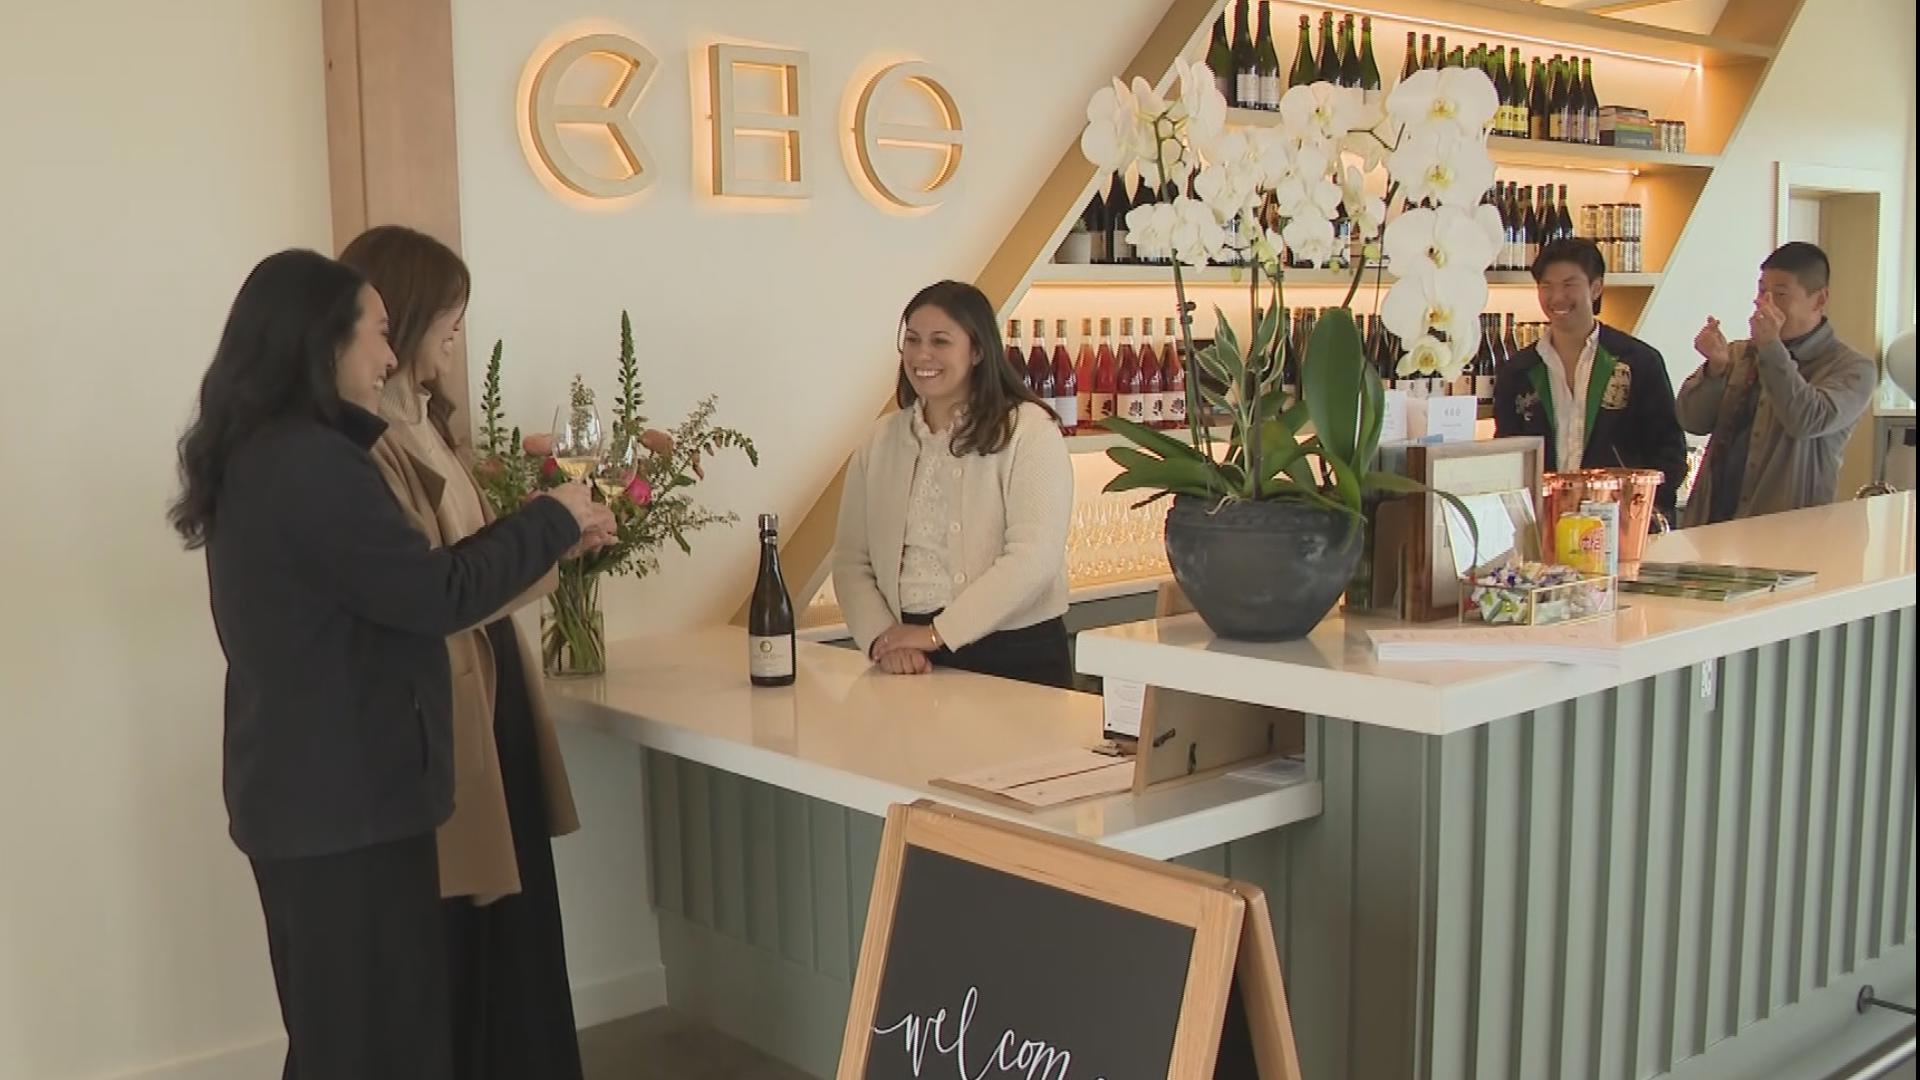 Cho Wines opened a new tasting room in Hillsboro. The owners are organizing the second annual AAPI Food and Wine Festival, which runs May 18-19.